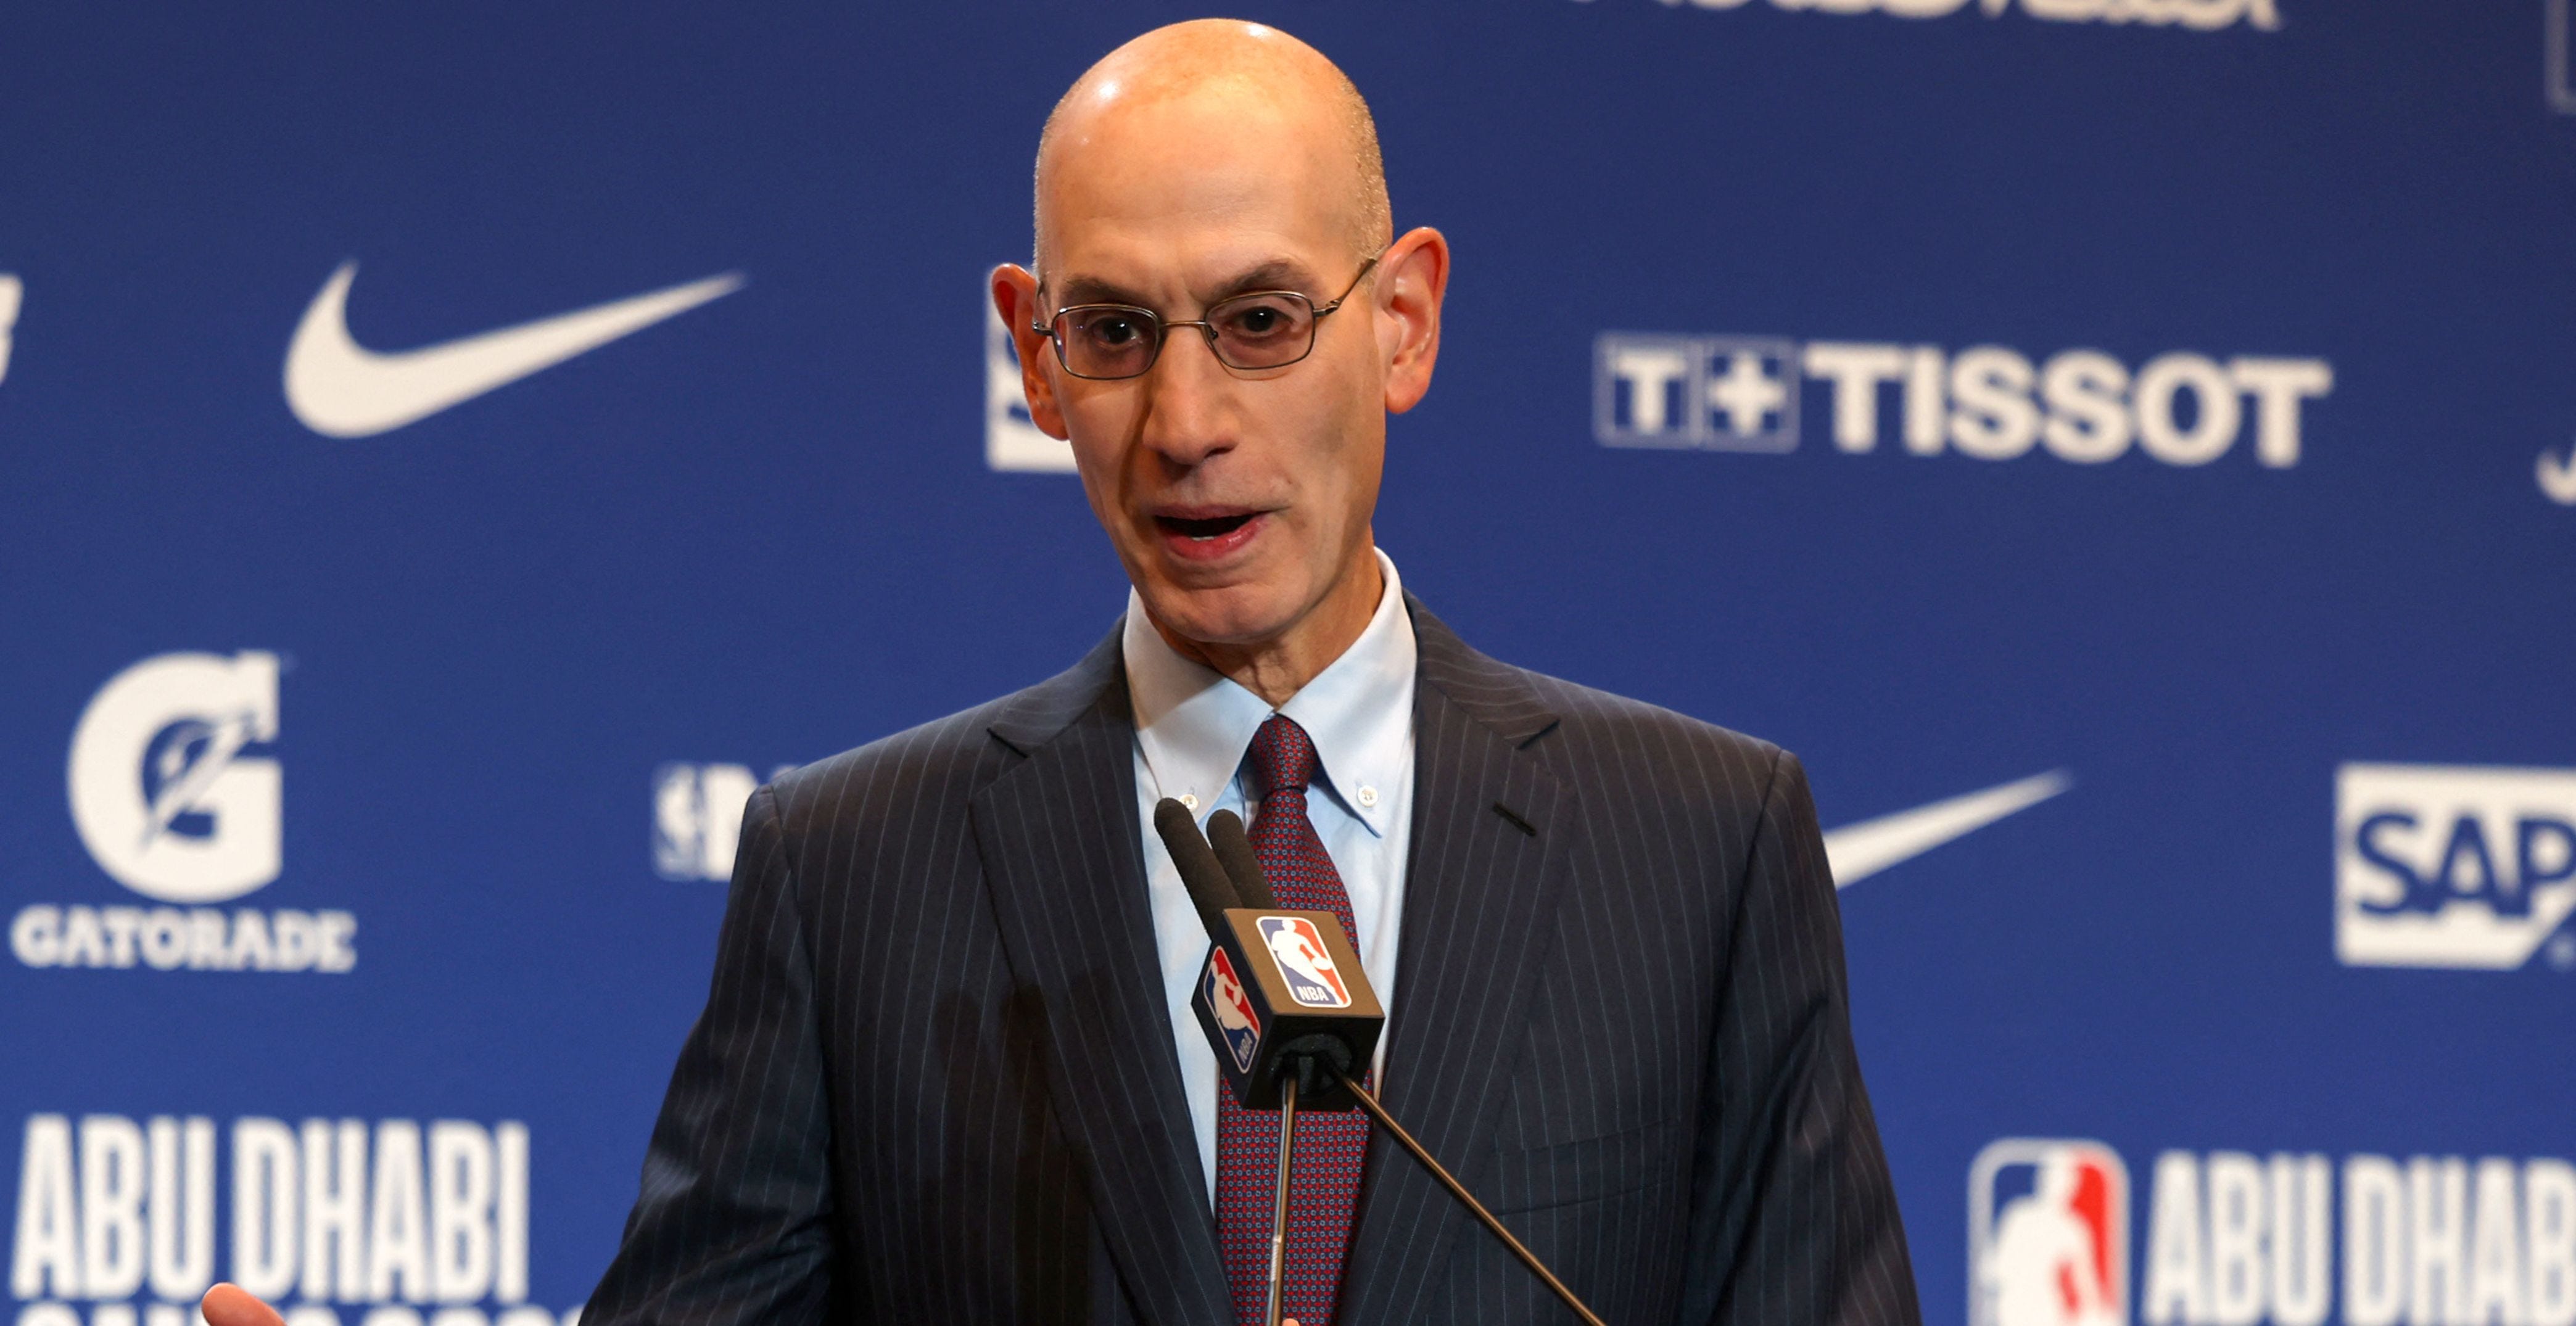 adam silver confirmed jontay porter could face banishment from nba over betting scandal